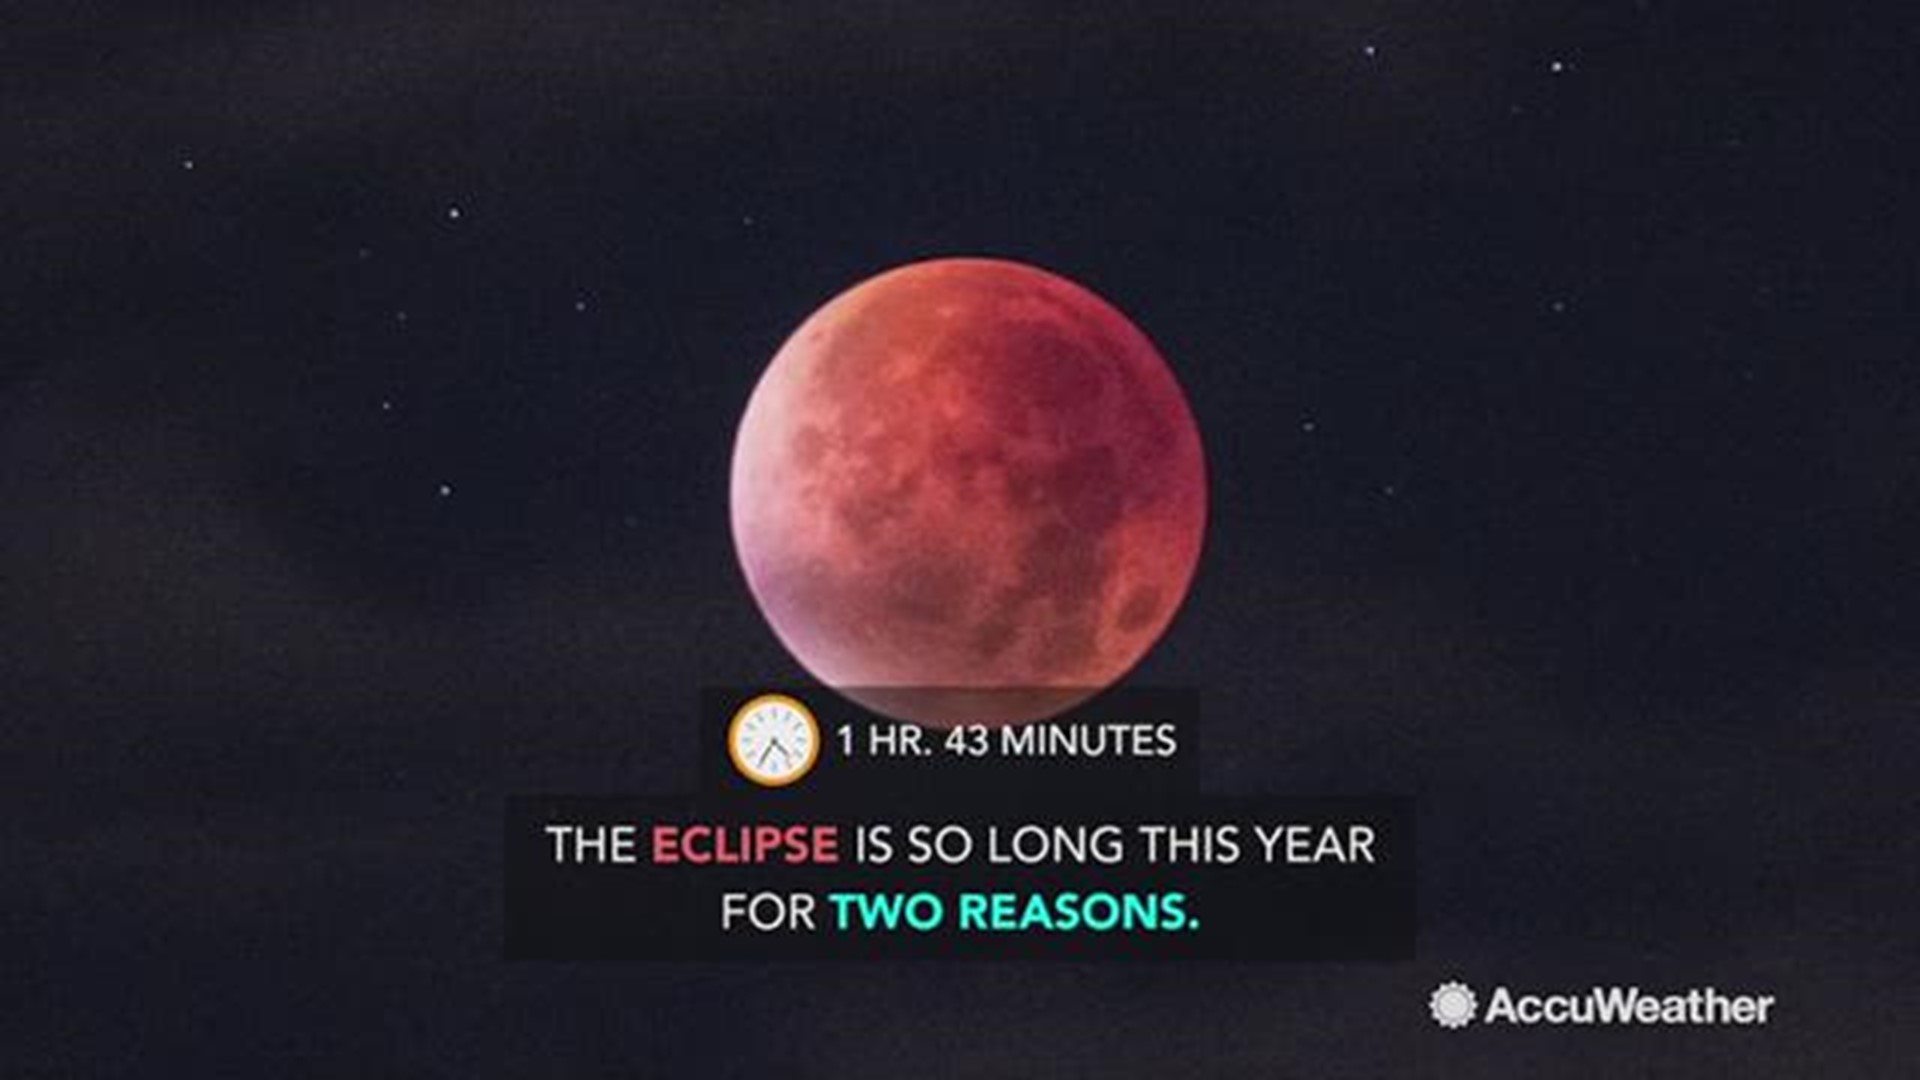 On July 27, a total lunar eclipse will rise over the night sky.  At 1 hour and 43 minutes, it will be the longest lunar eclipse in the 21st century.  Much of Africa, the Middle East and central Asia will be able to see the eclipse.  Unfortunately, North A